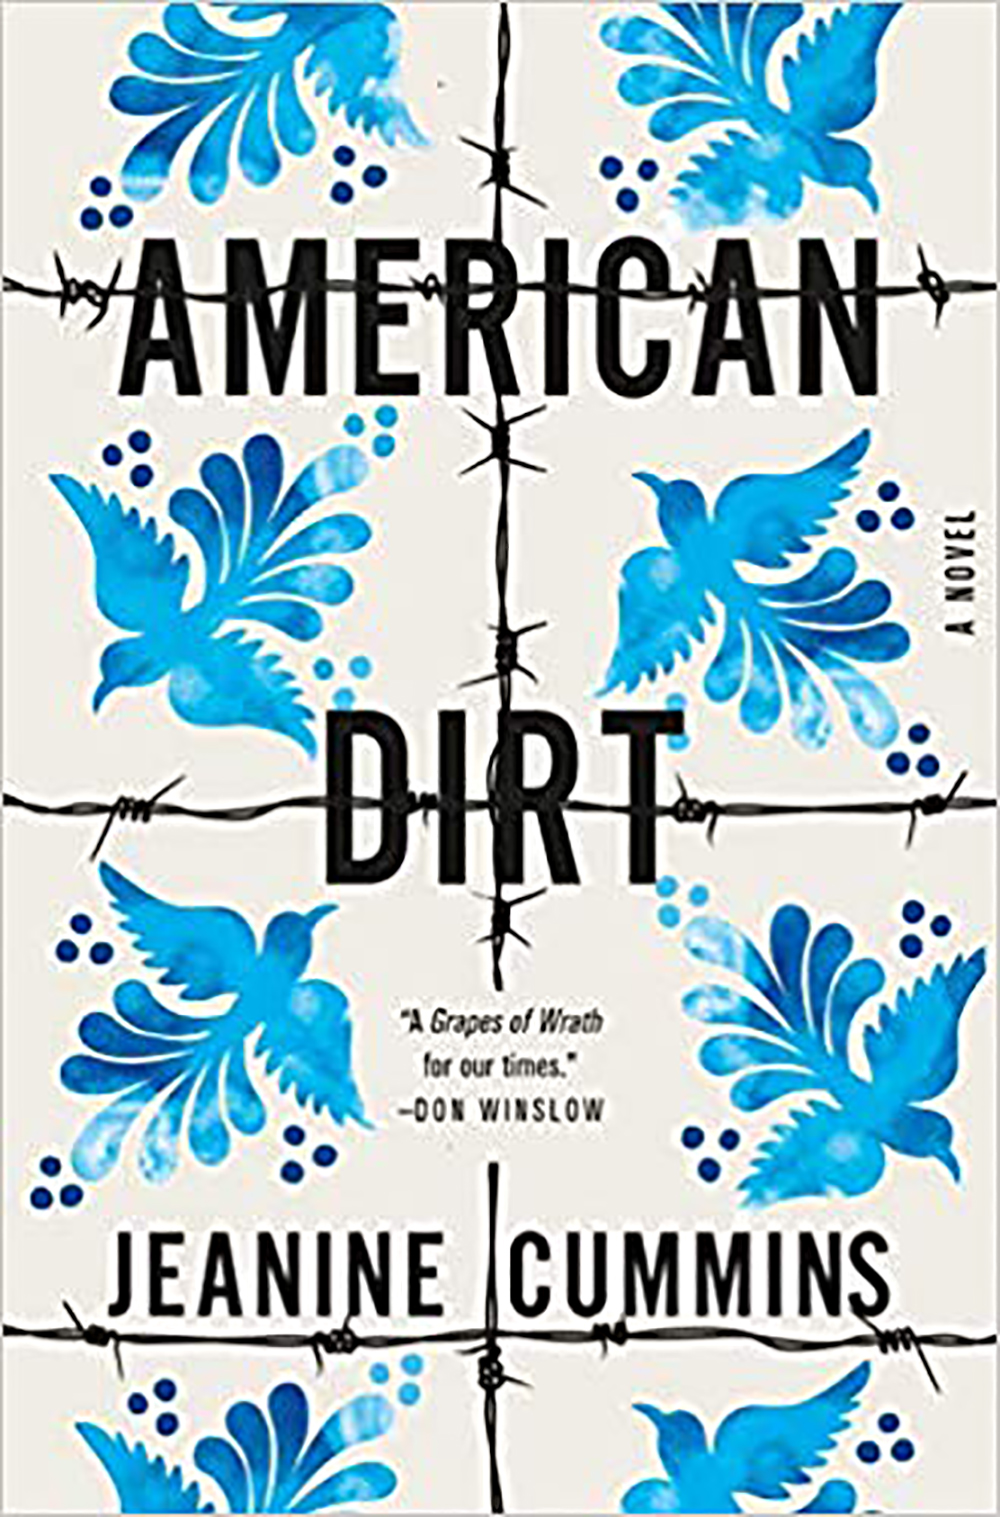 Read American Dirt, the newest book from Jeanine Cummins (publishing Jan. 21st.) which is already being called the next great American novel.